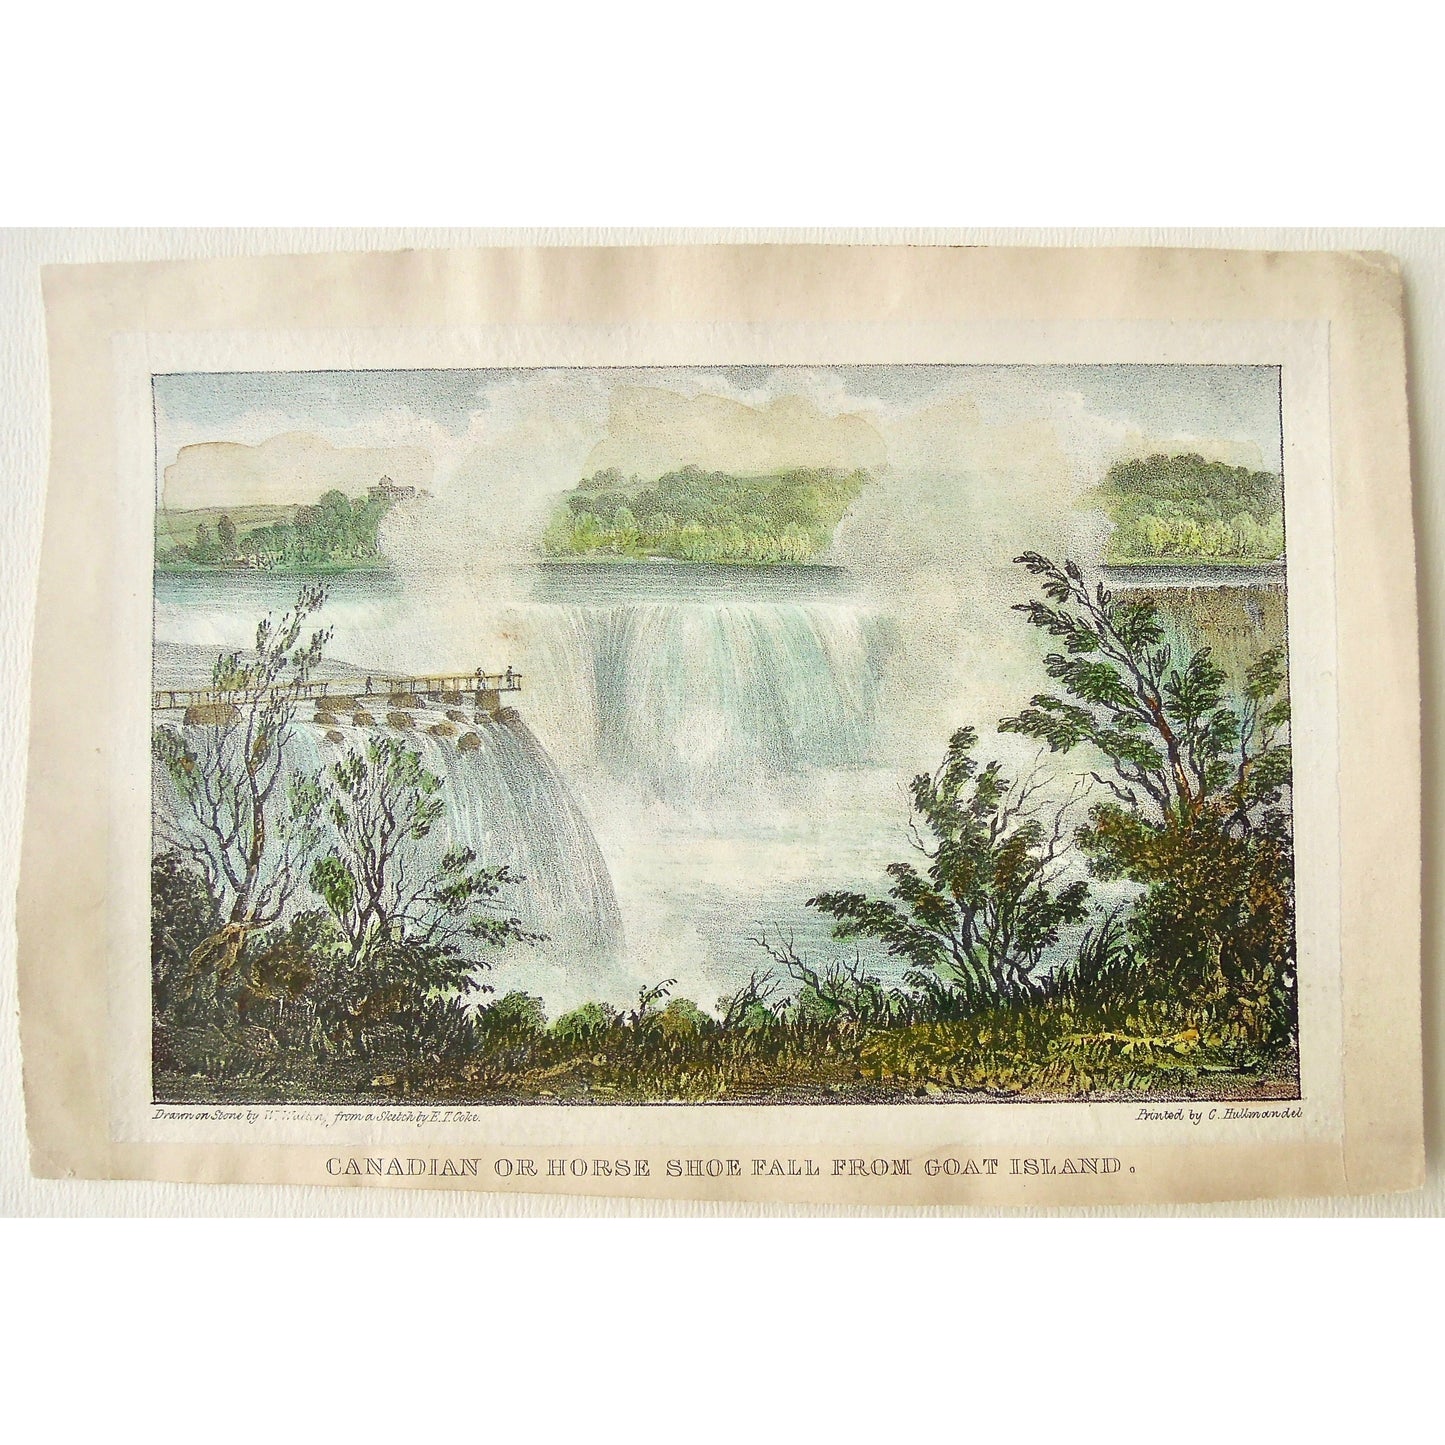 Canadian or Horse Shoe Fall from Goat Island.  (B1-E-24d)